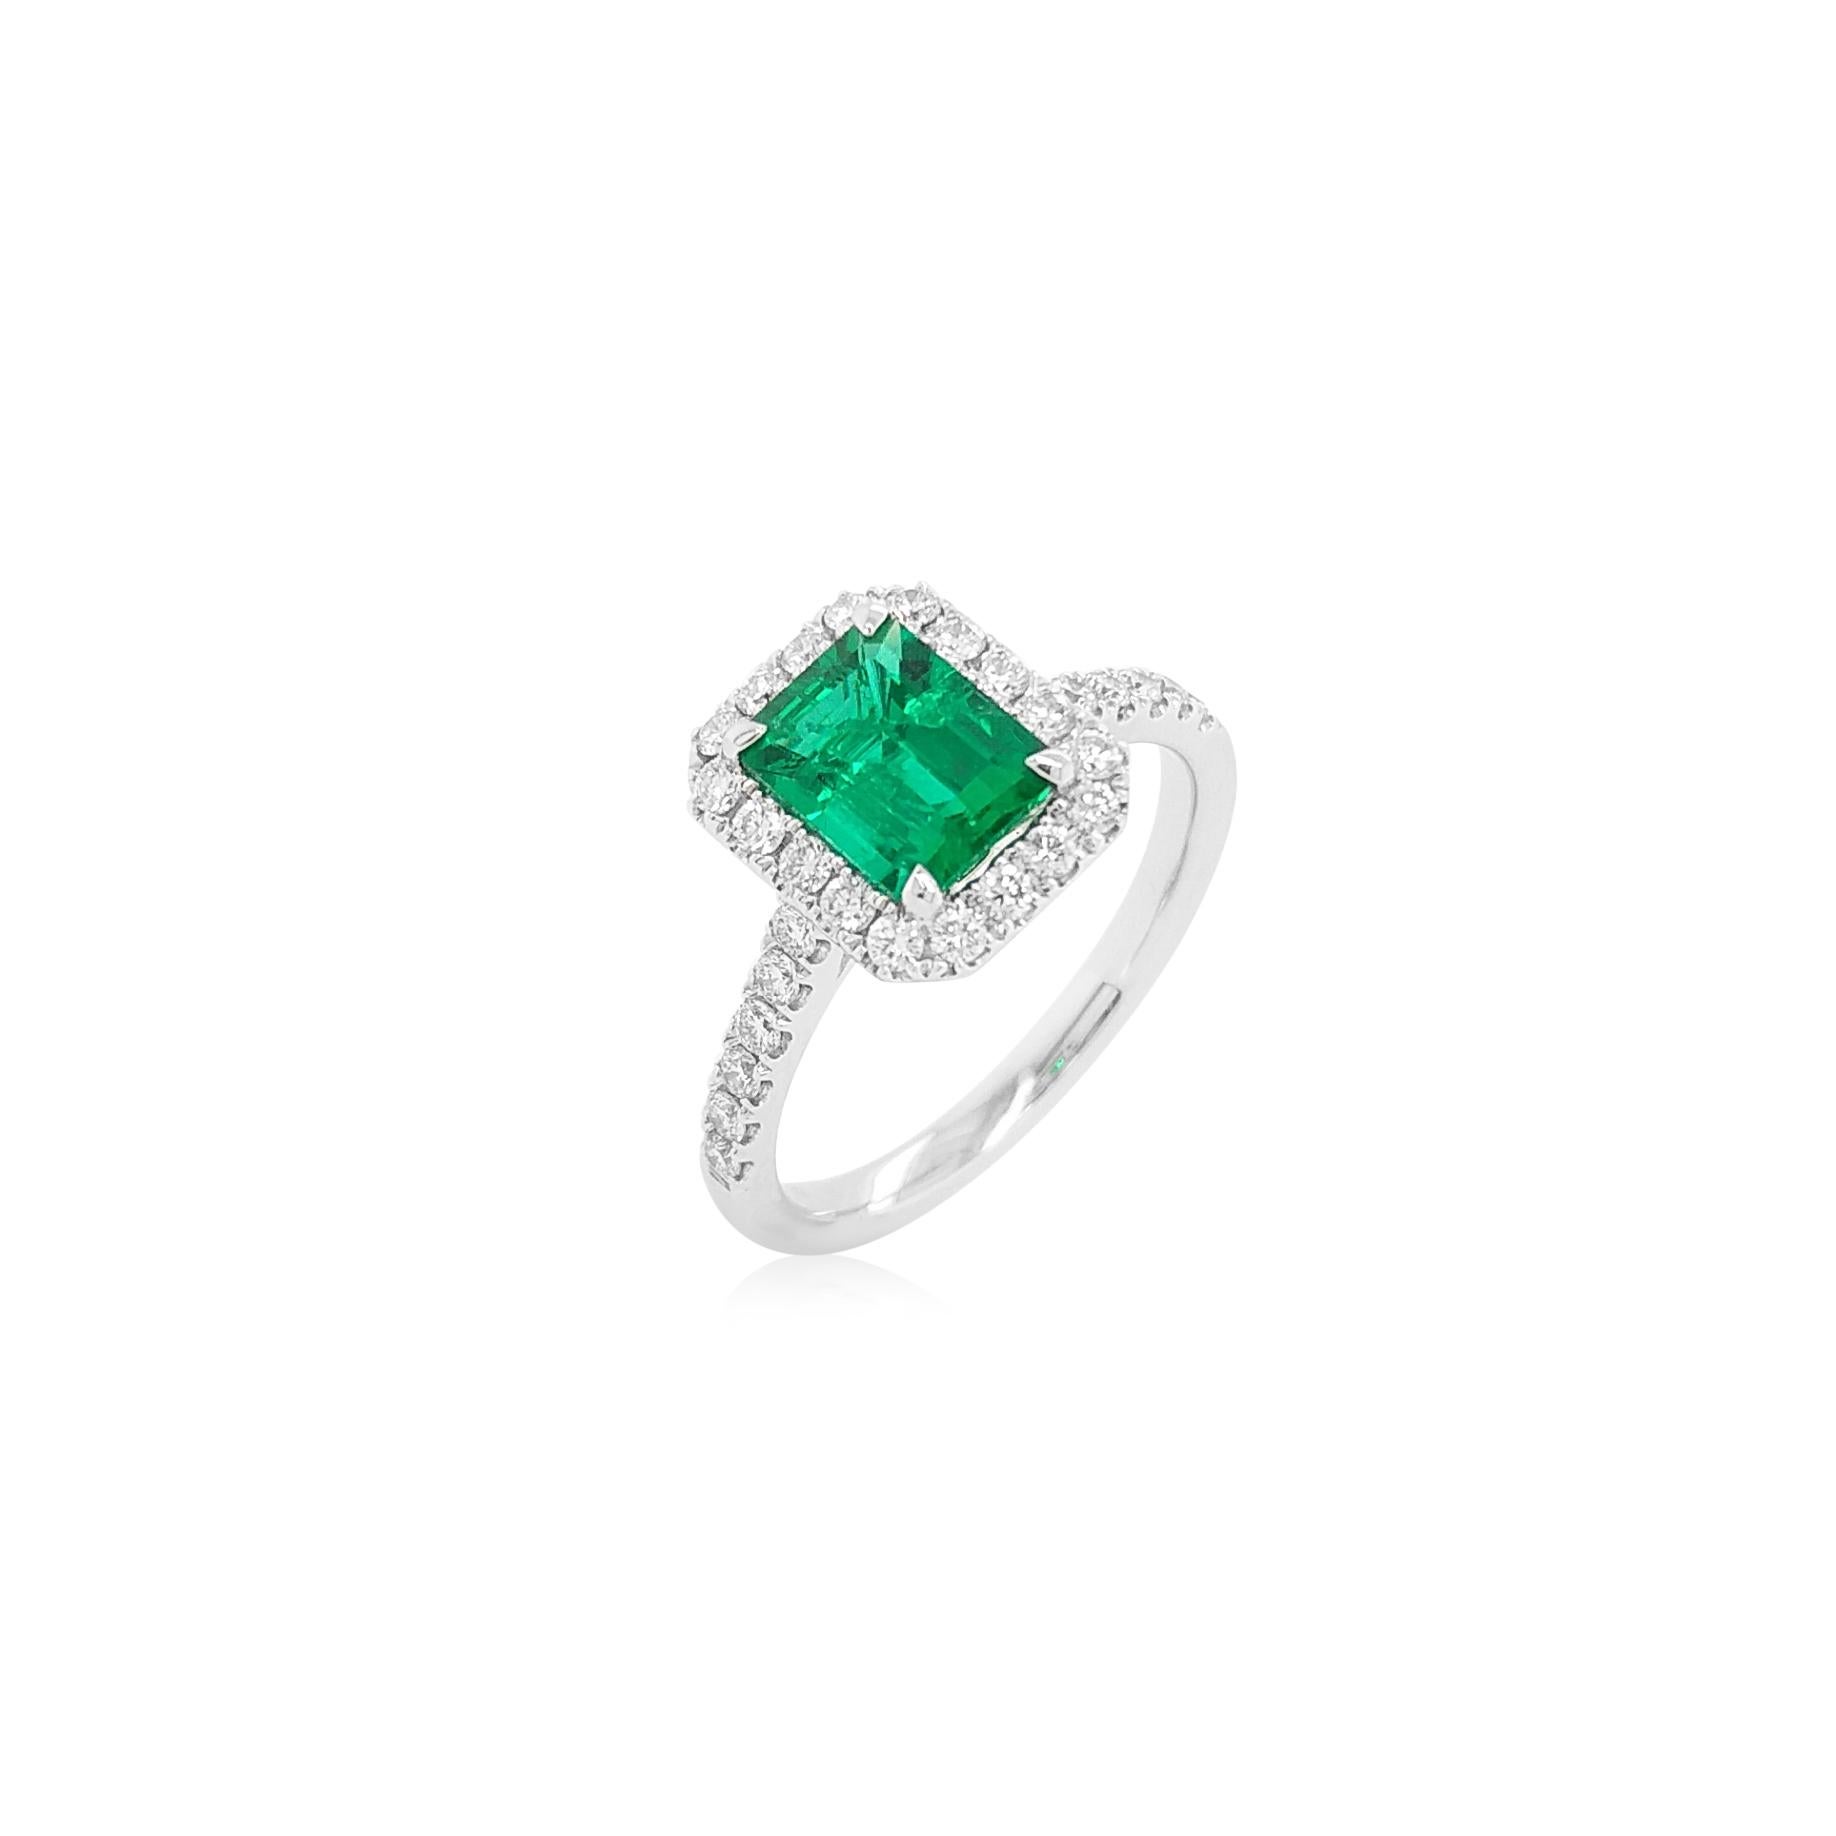 Emerald Cut Certified Colombian Emerald Platinum Wedding Ring For Sale